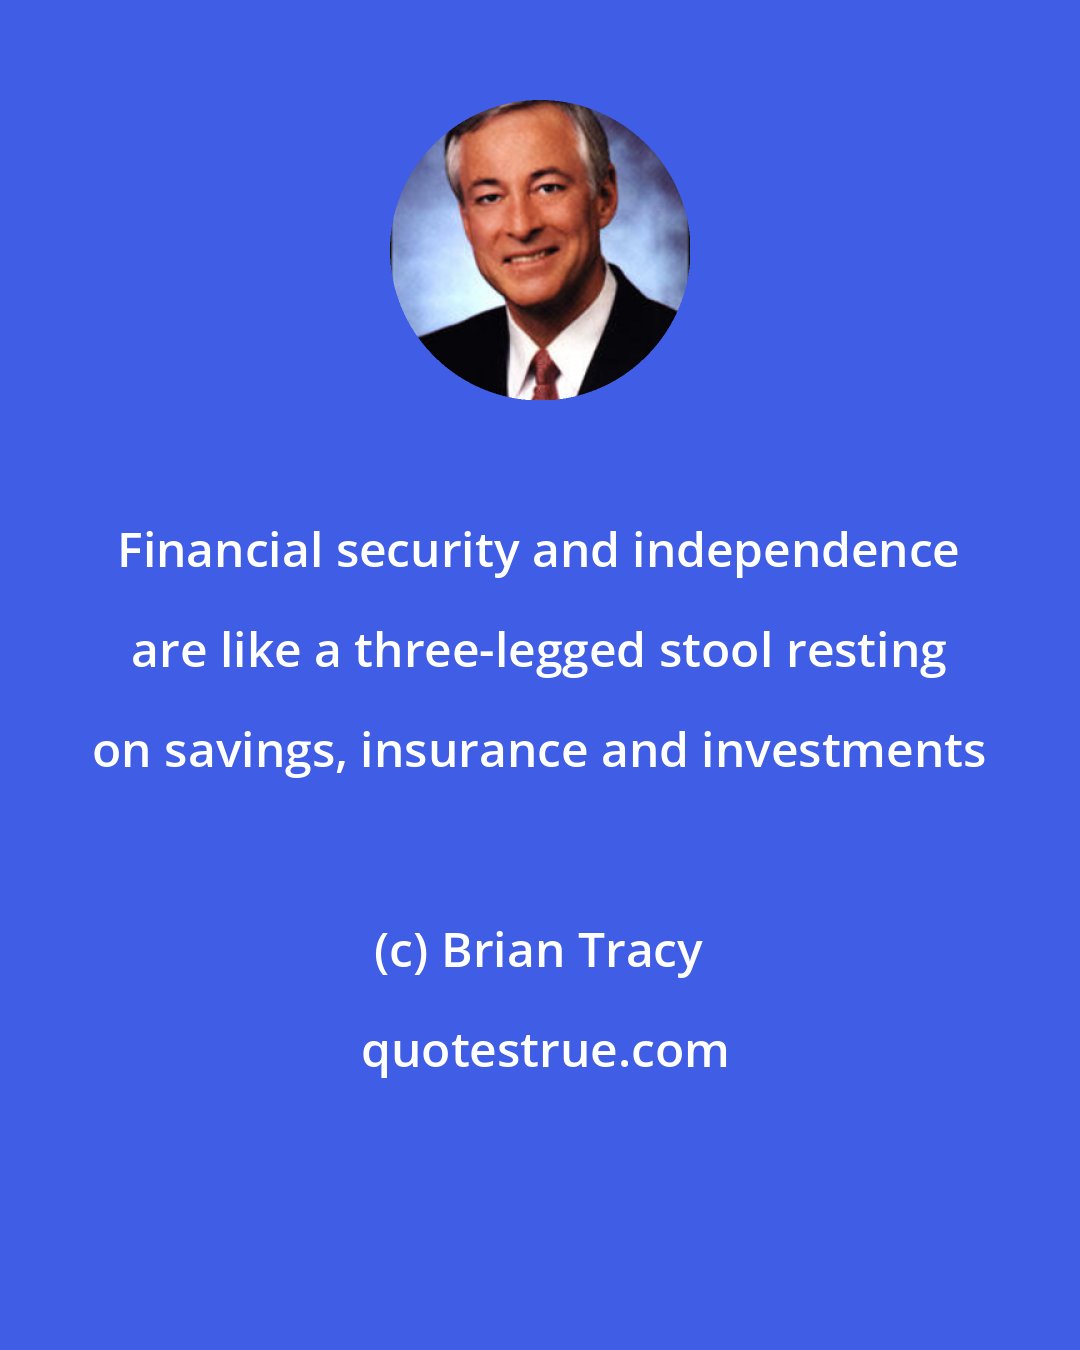 Brian Tracy: Financial security and independence are like a three-legged stool resting on savings, insurance and investments